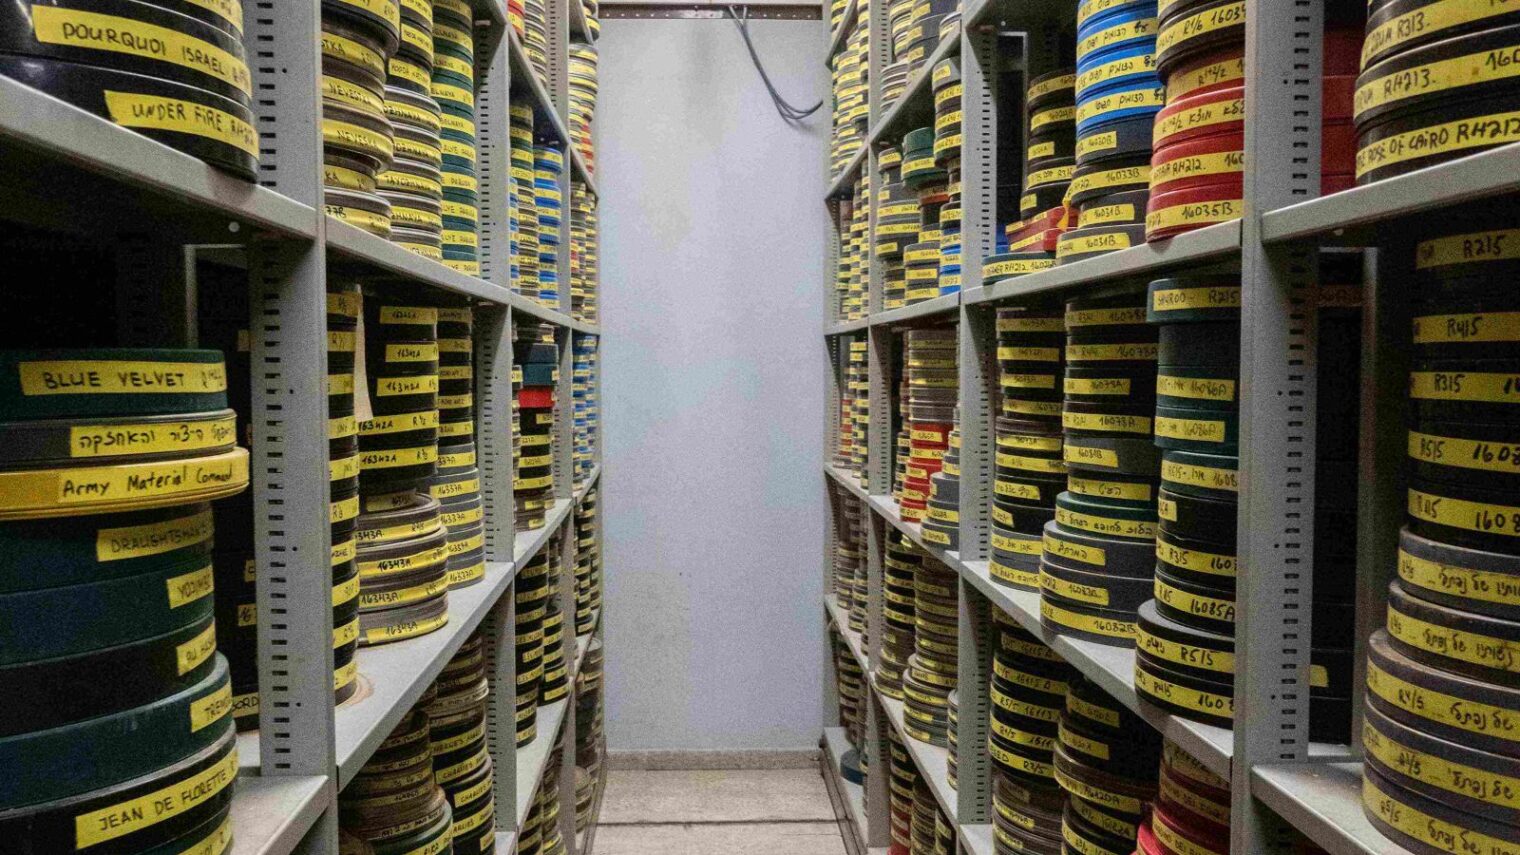 Many thousands of films from The Jerusalem Cinematheque’s Israel Film Archive have undergone digitization and are now available for all. Photo by Bar Mayer